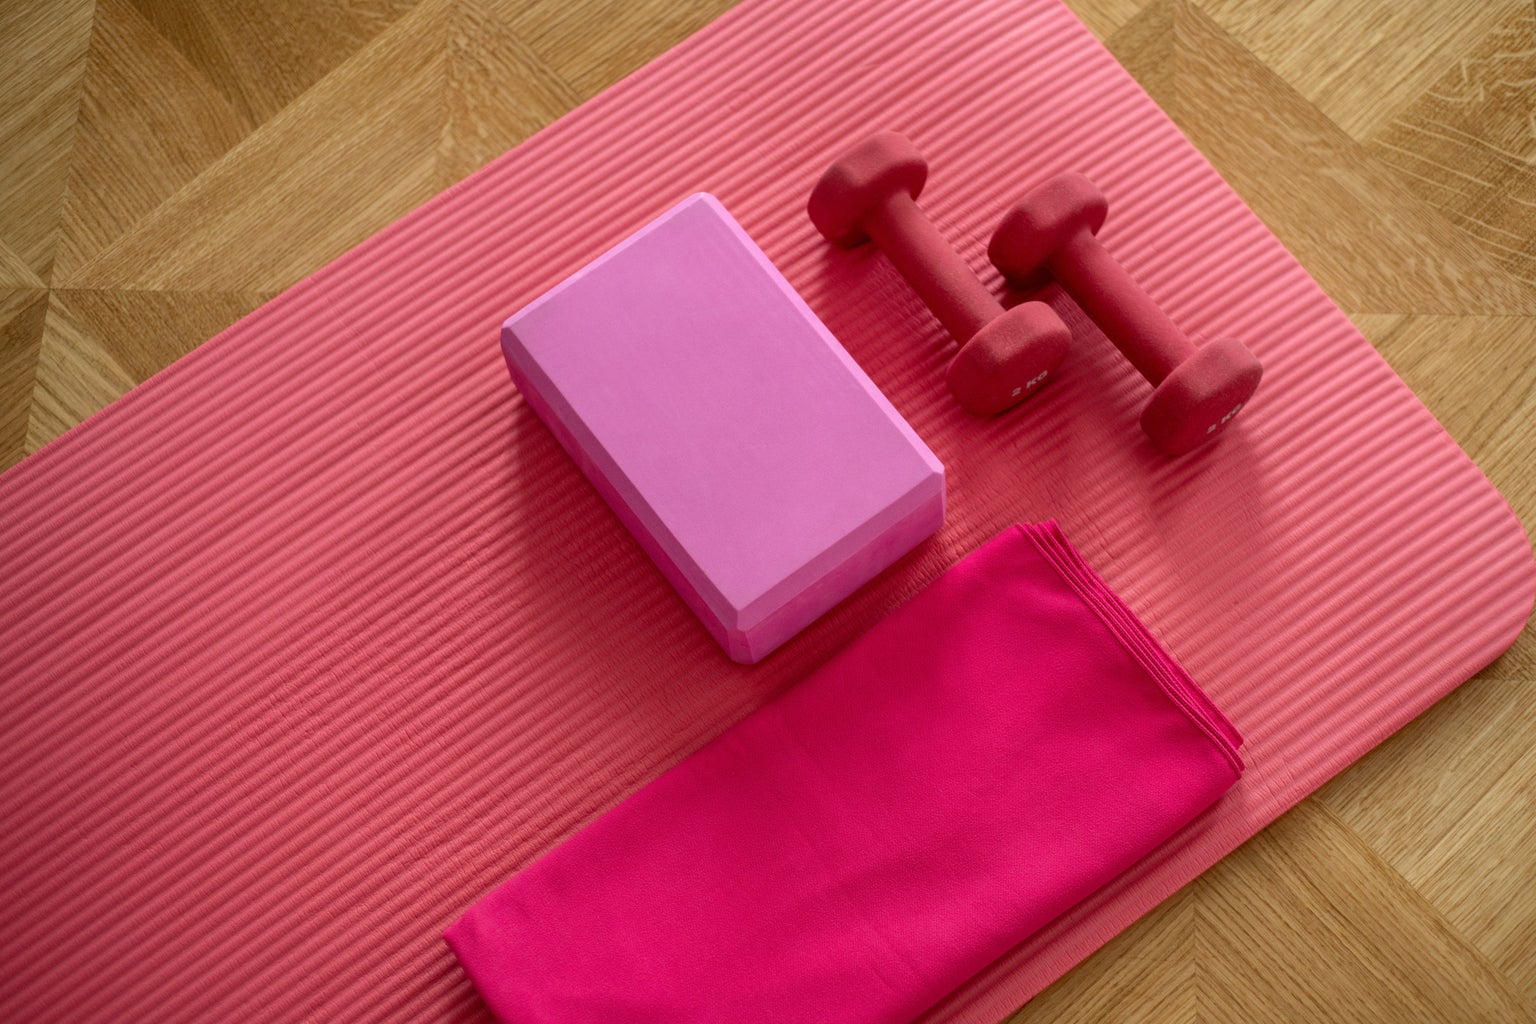 Pink weights and workout gear